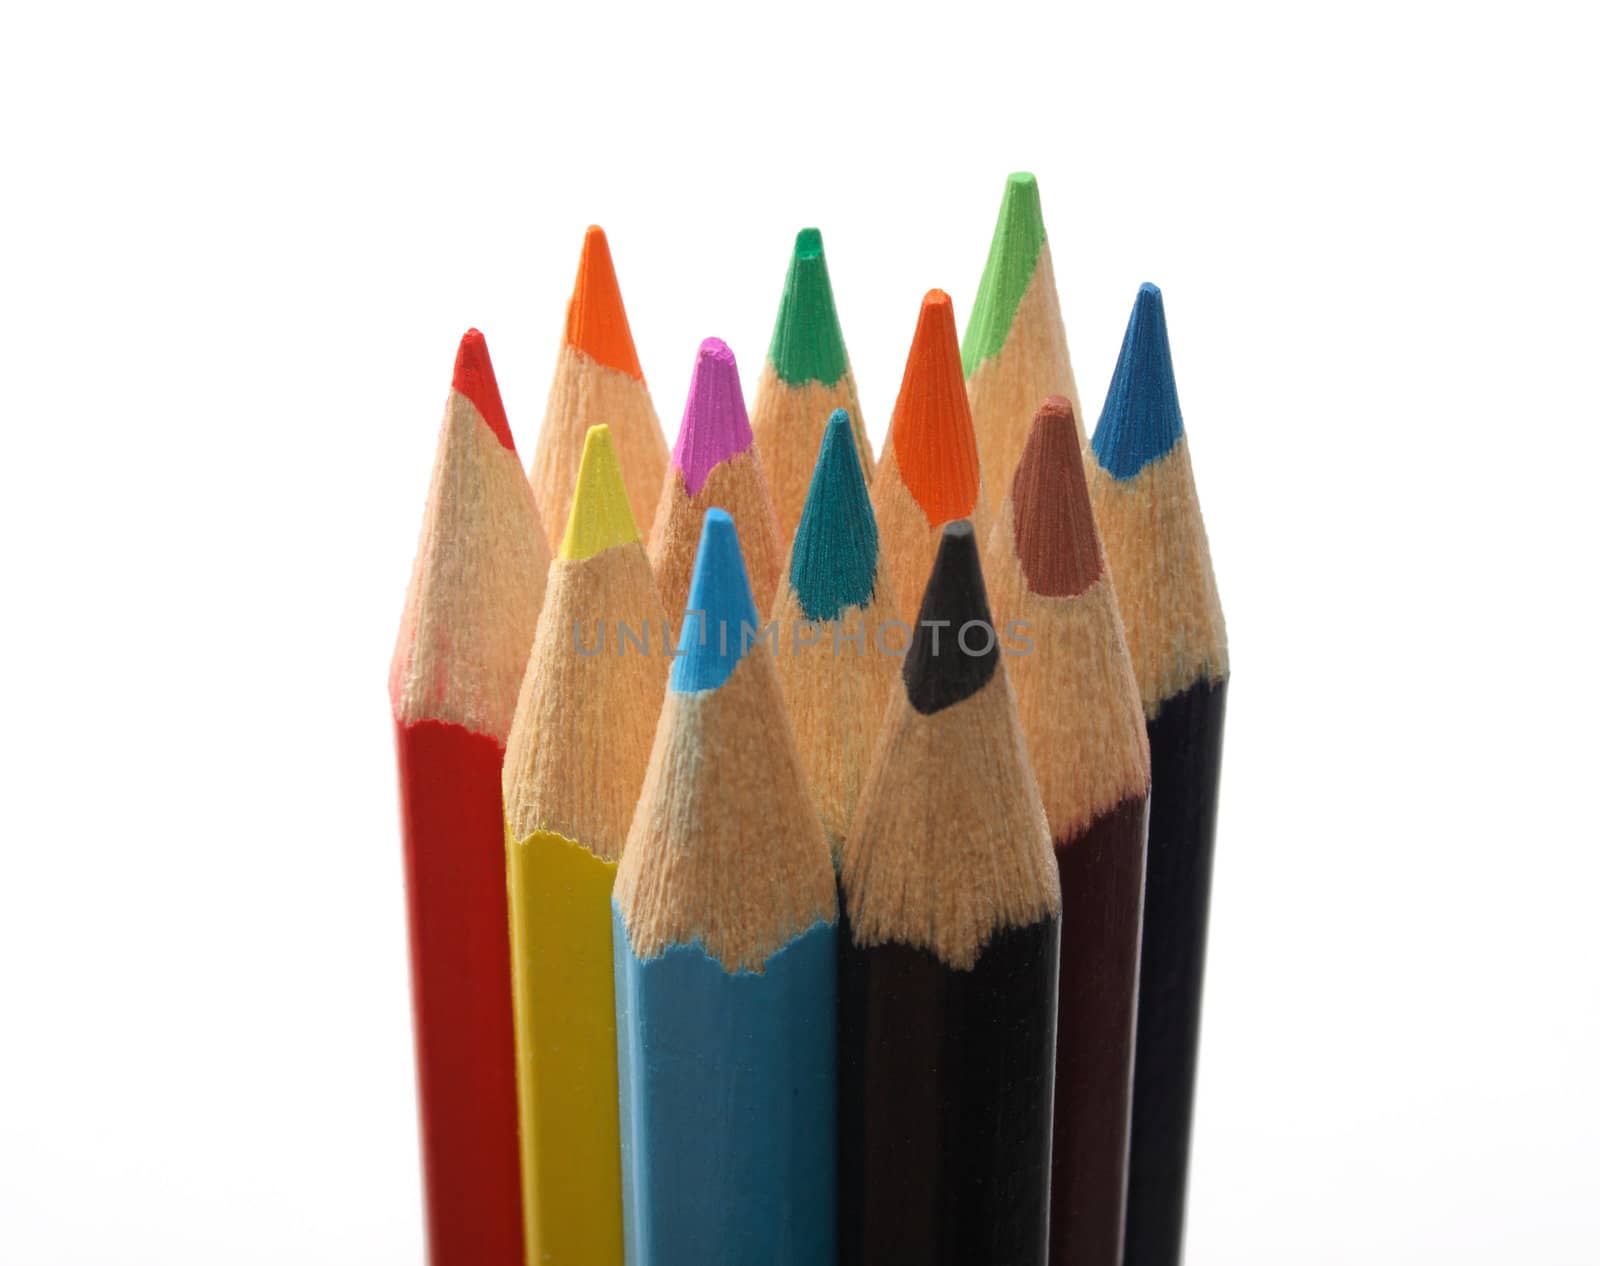 Colored pencils by Rbox